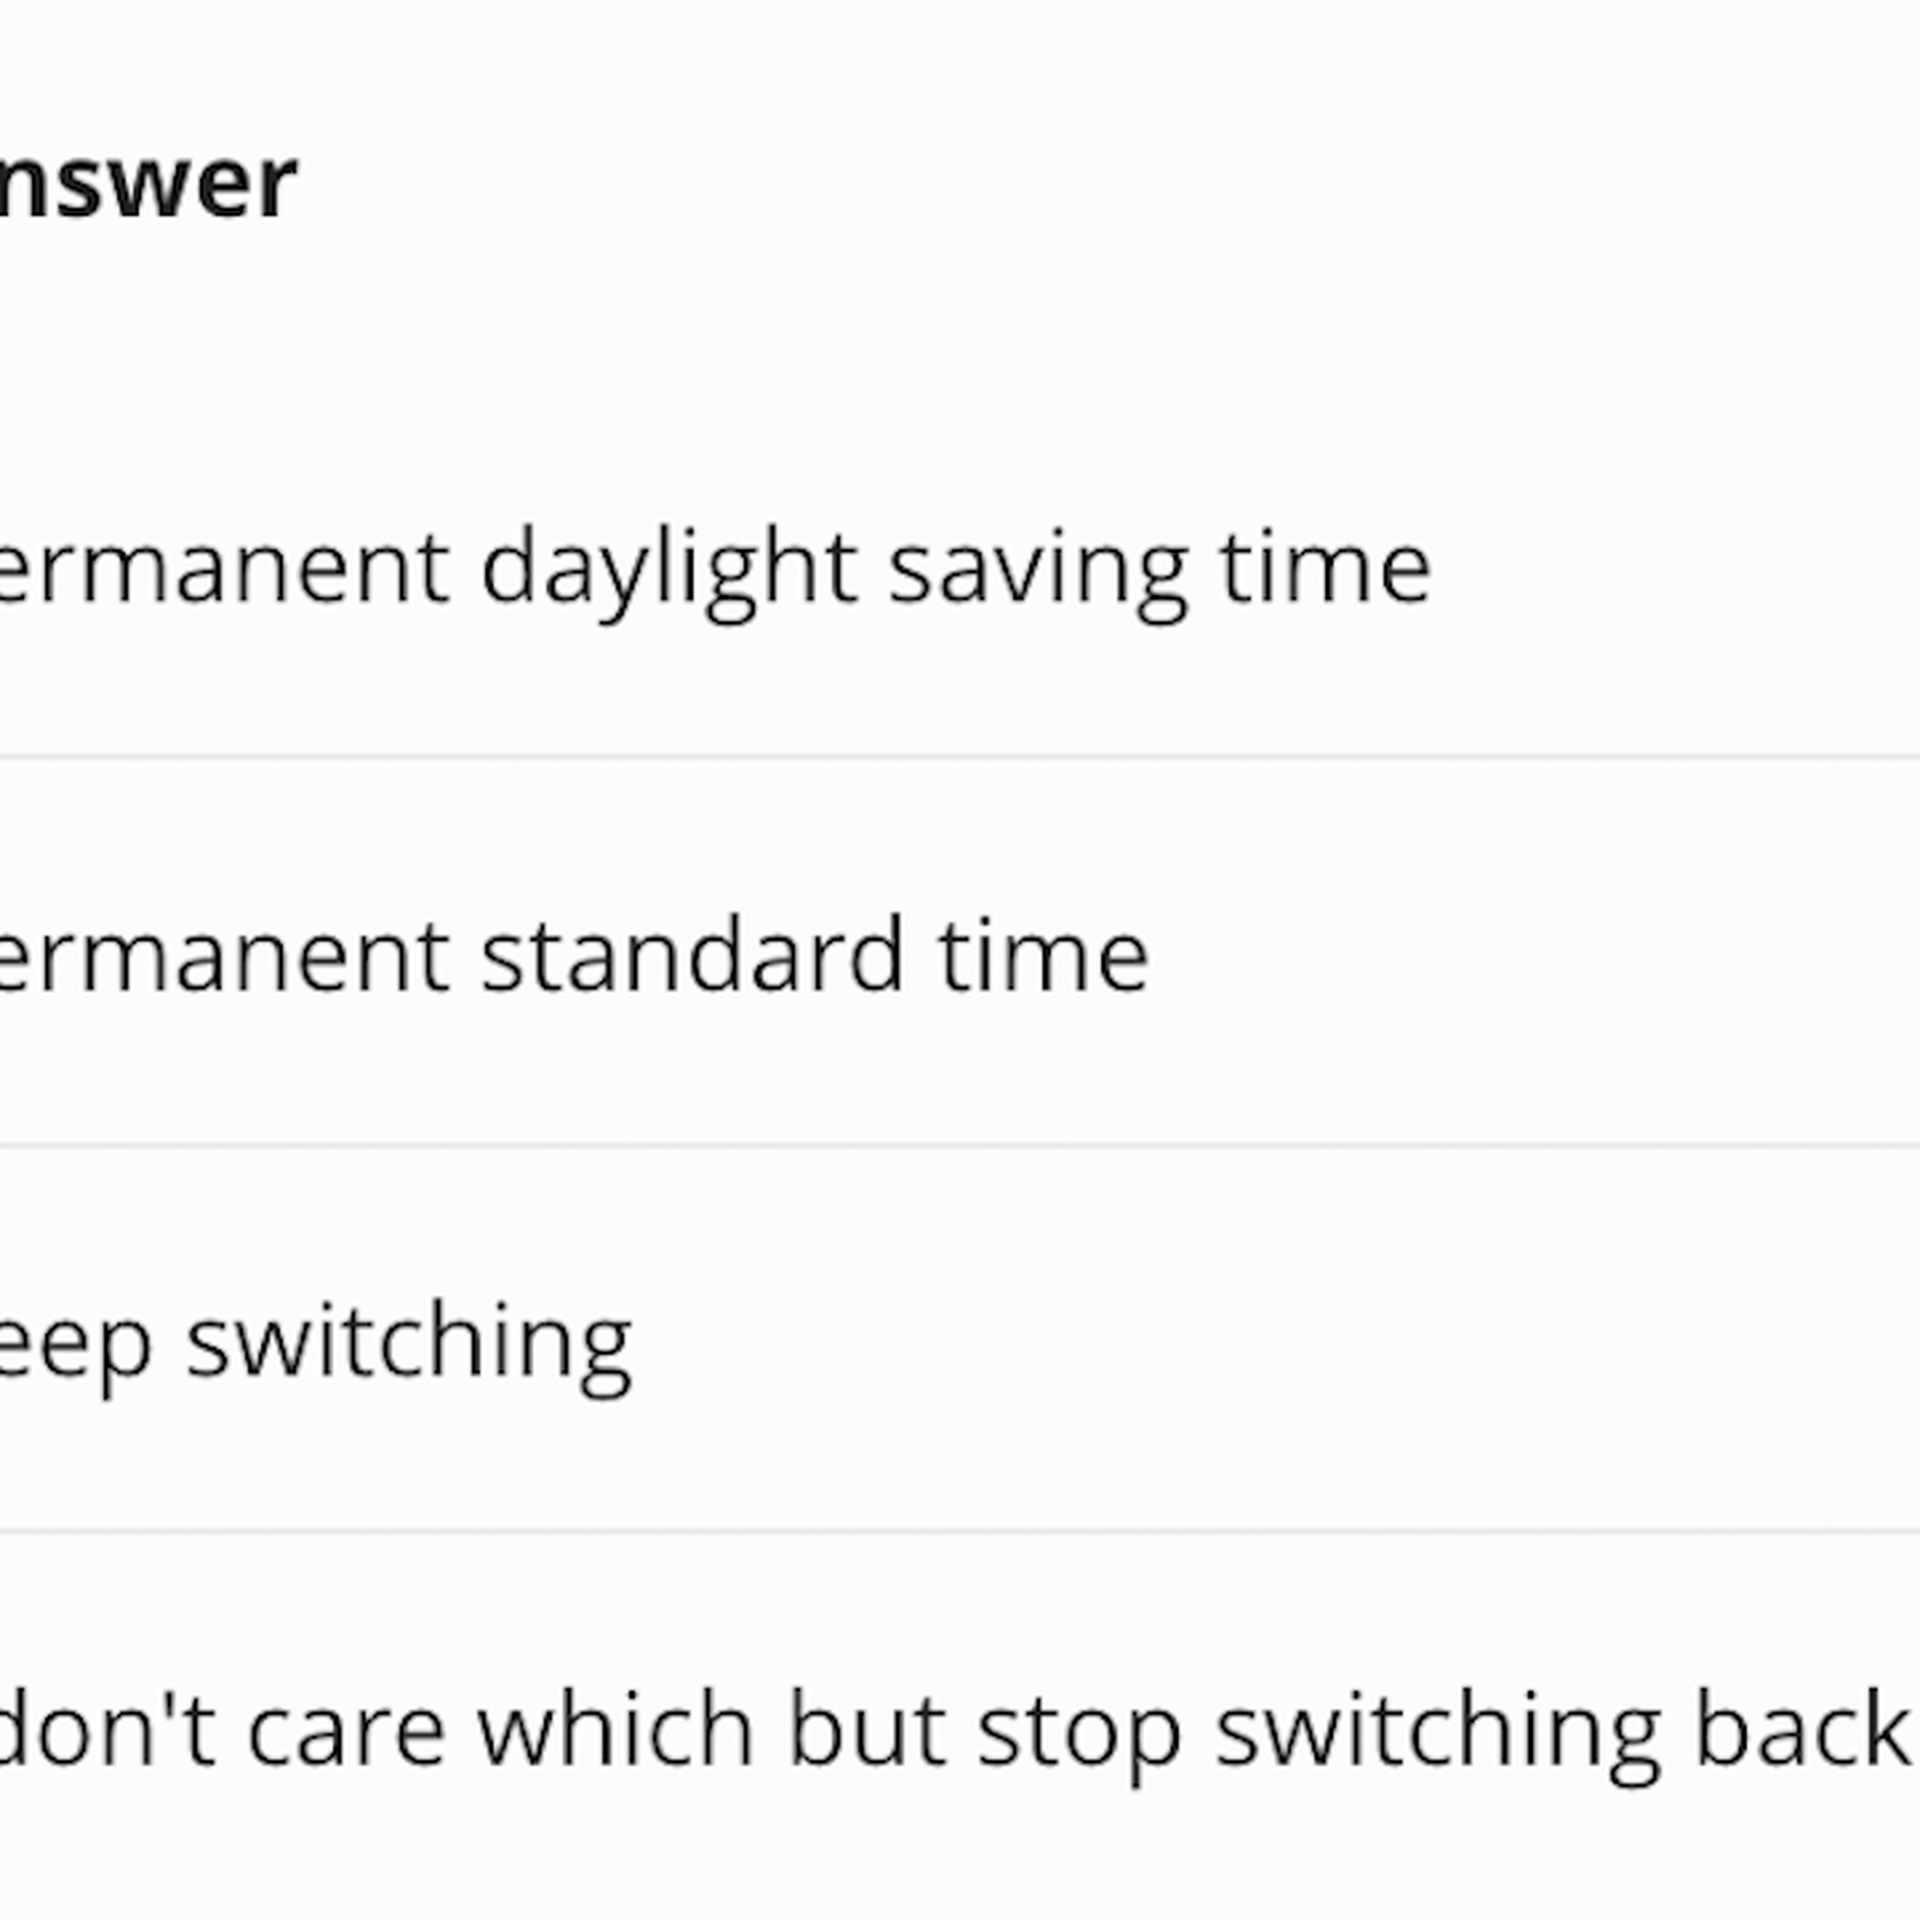 What people think about daylight saving time - Axios Portland